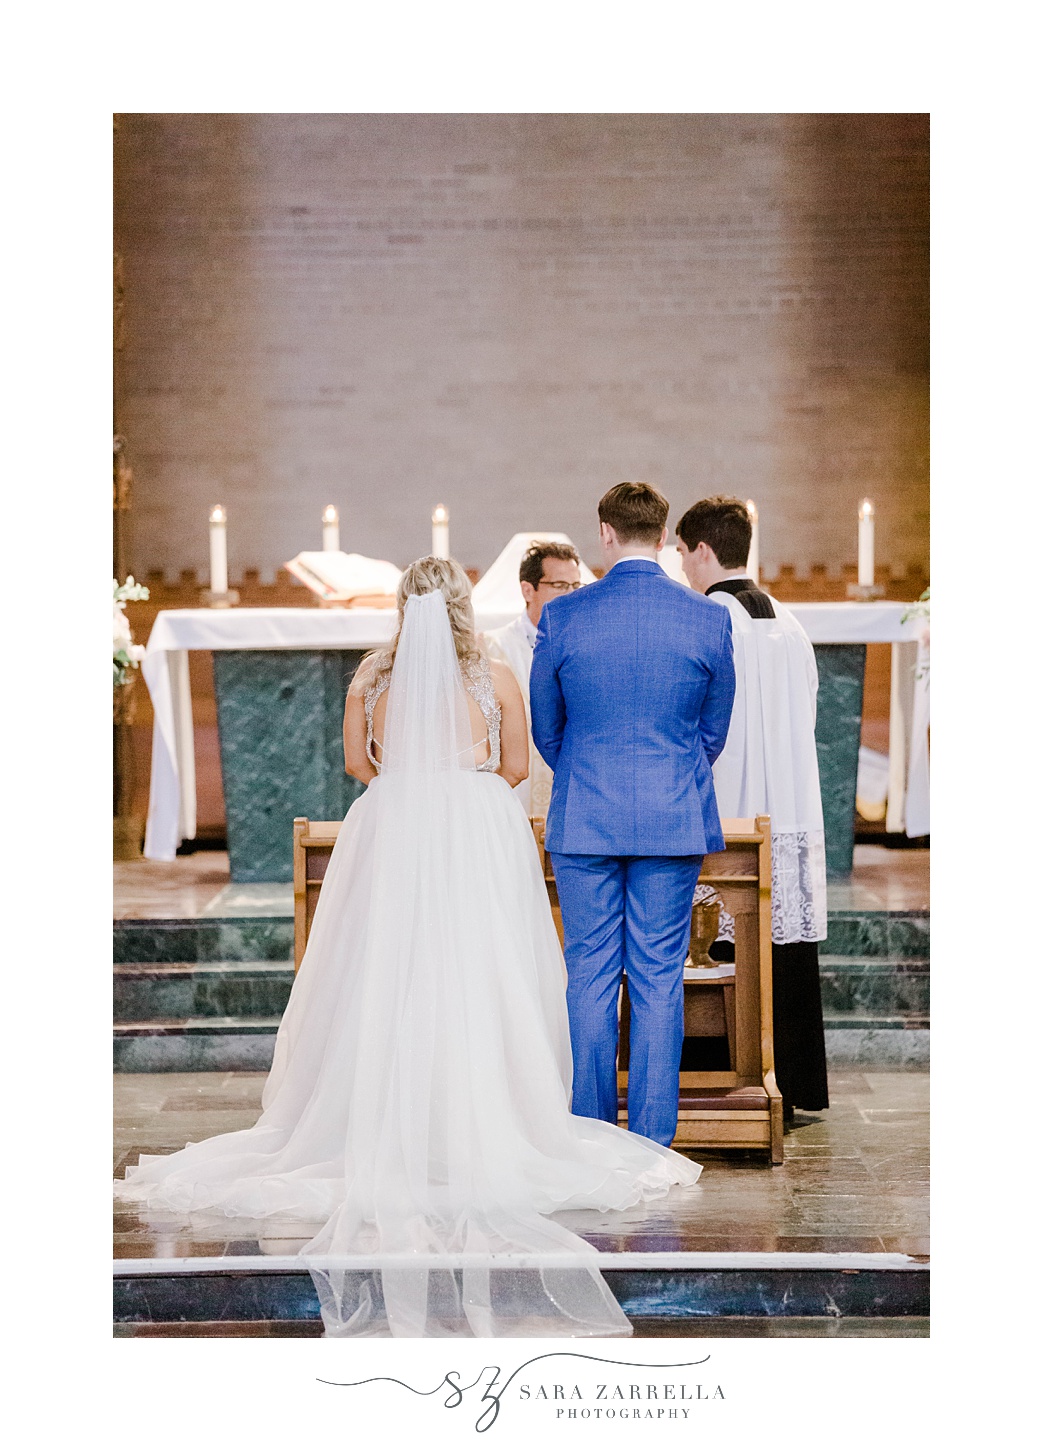 bride and groom kneel at alter during traditional wedding ceremony in church